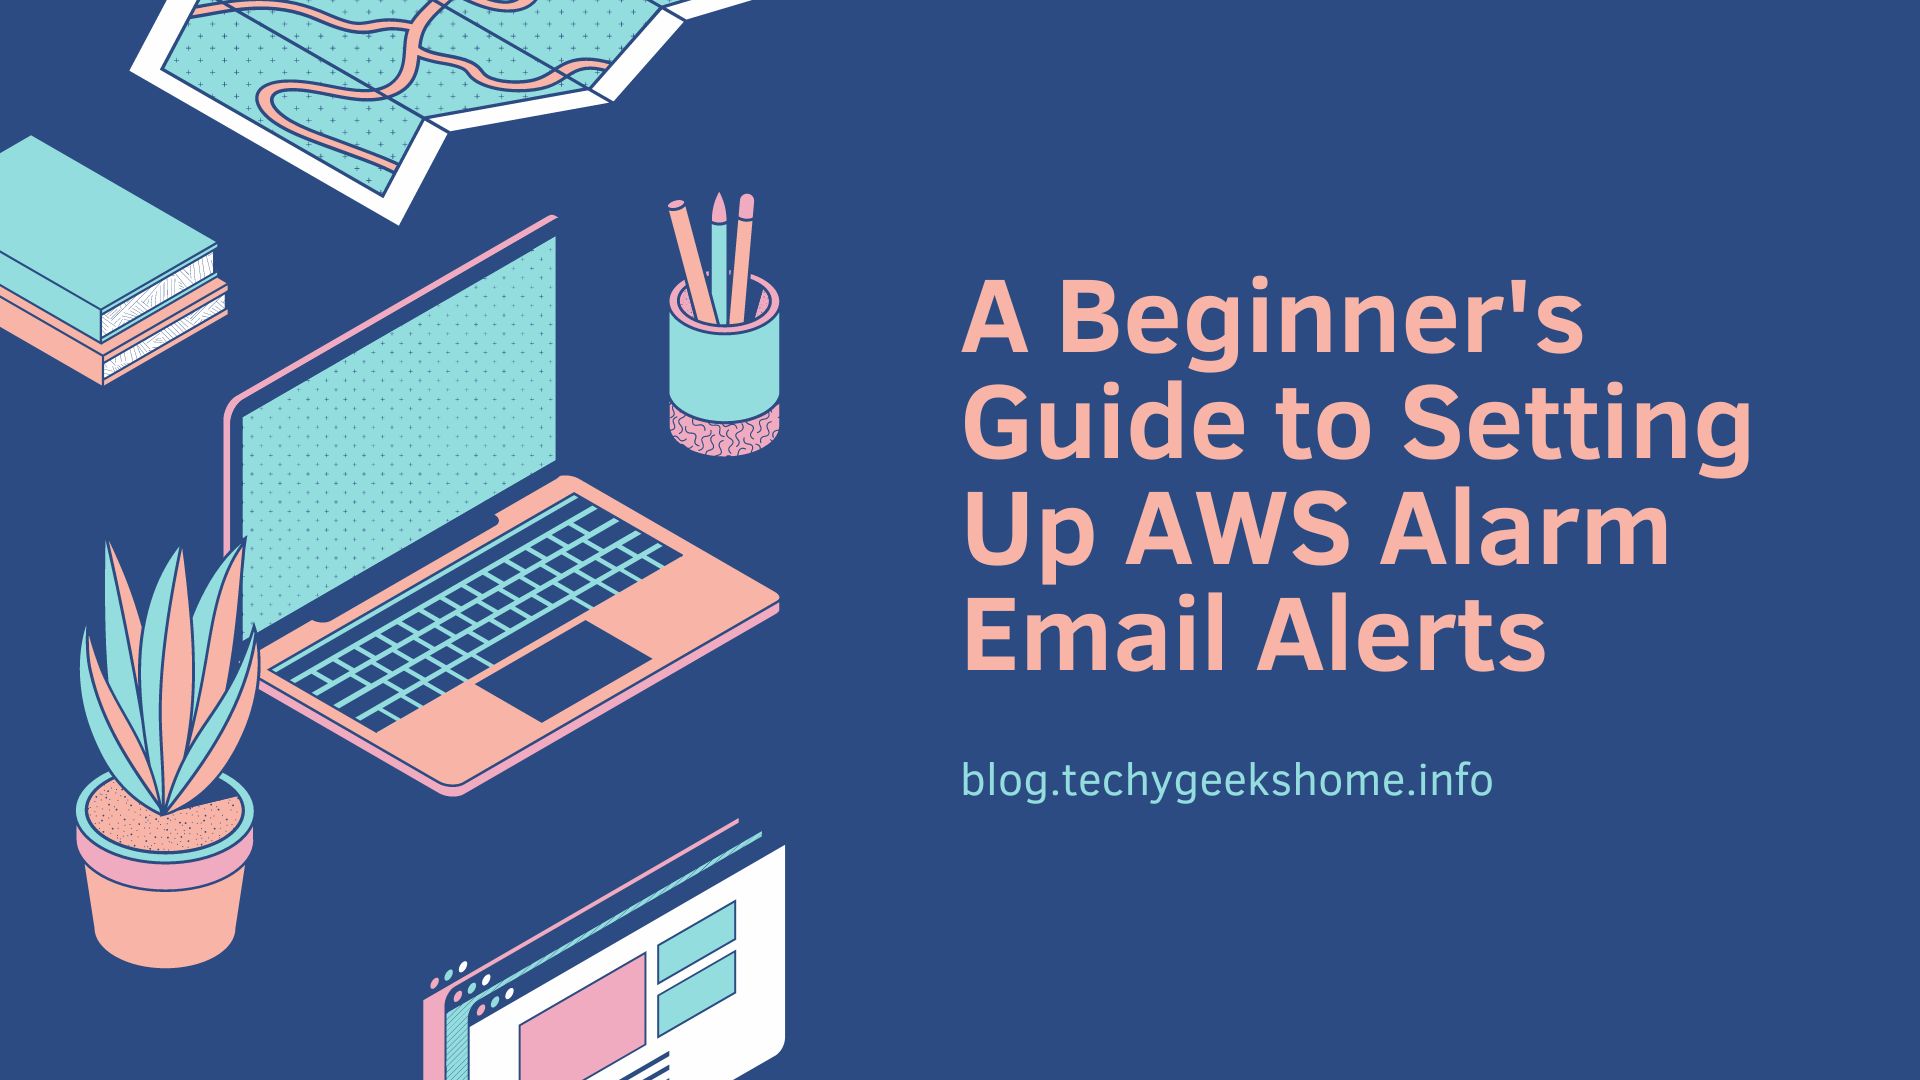 A Beginner's Guide to Setting Up AWS Alarm Email Alerts